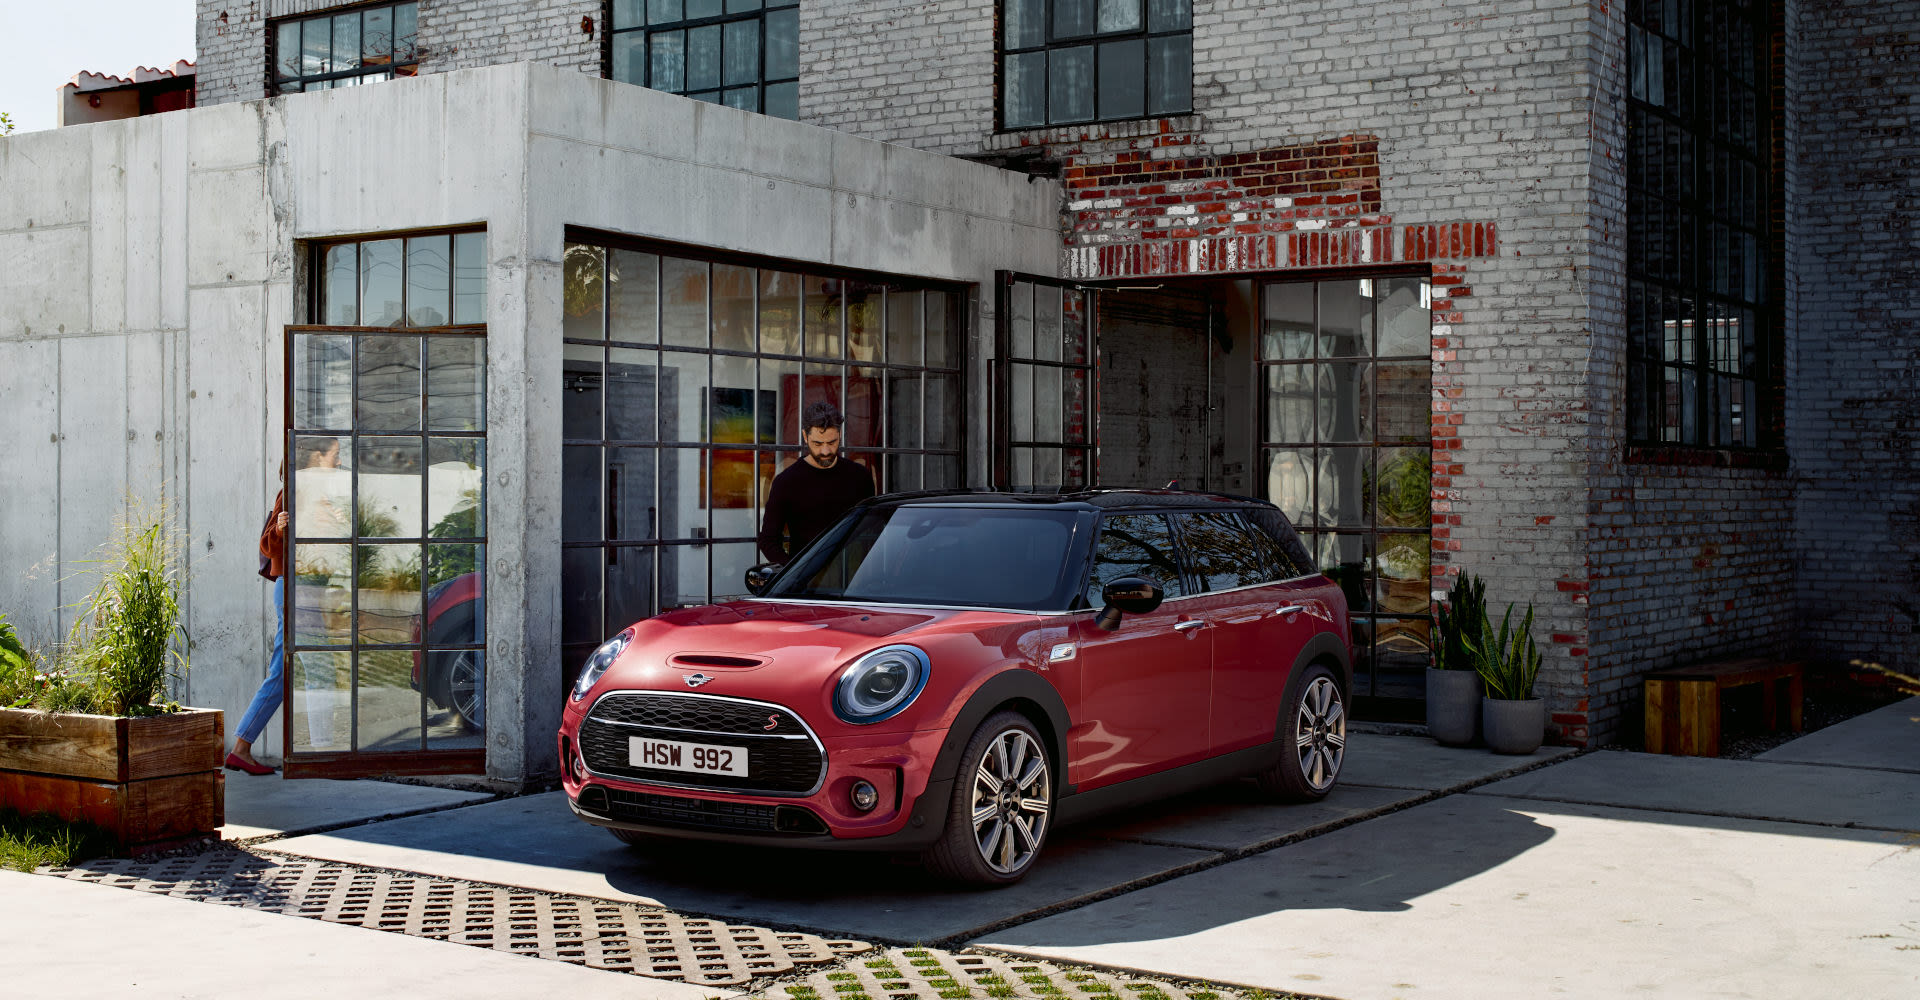 SAME MINI CLUBMAN. MORE STANDARD FEATURES.